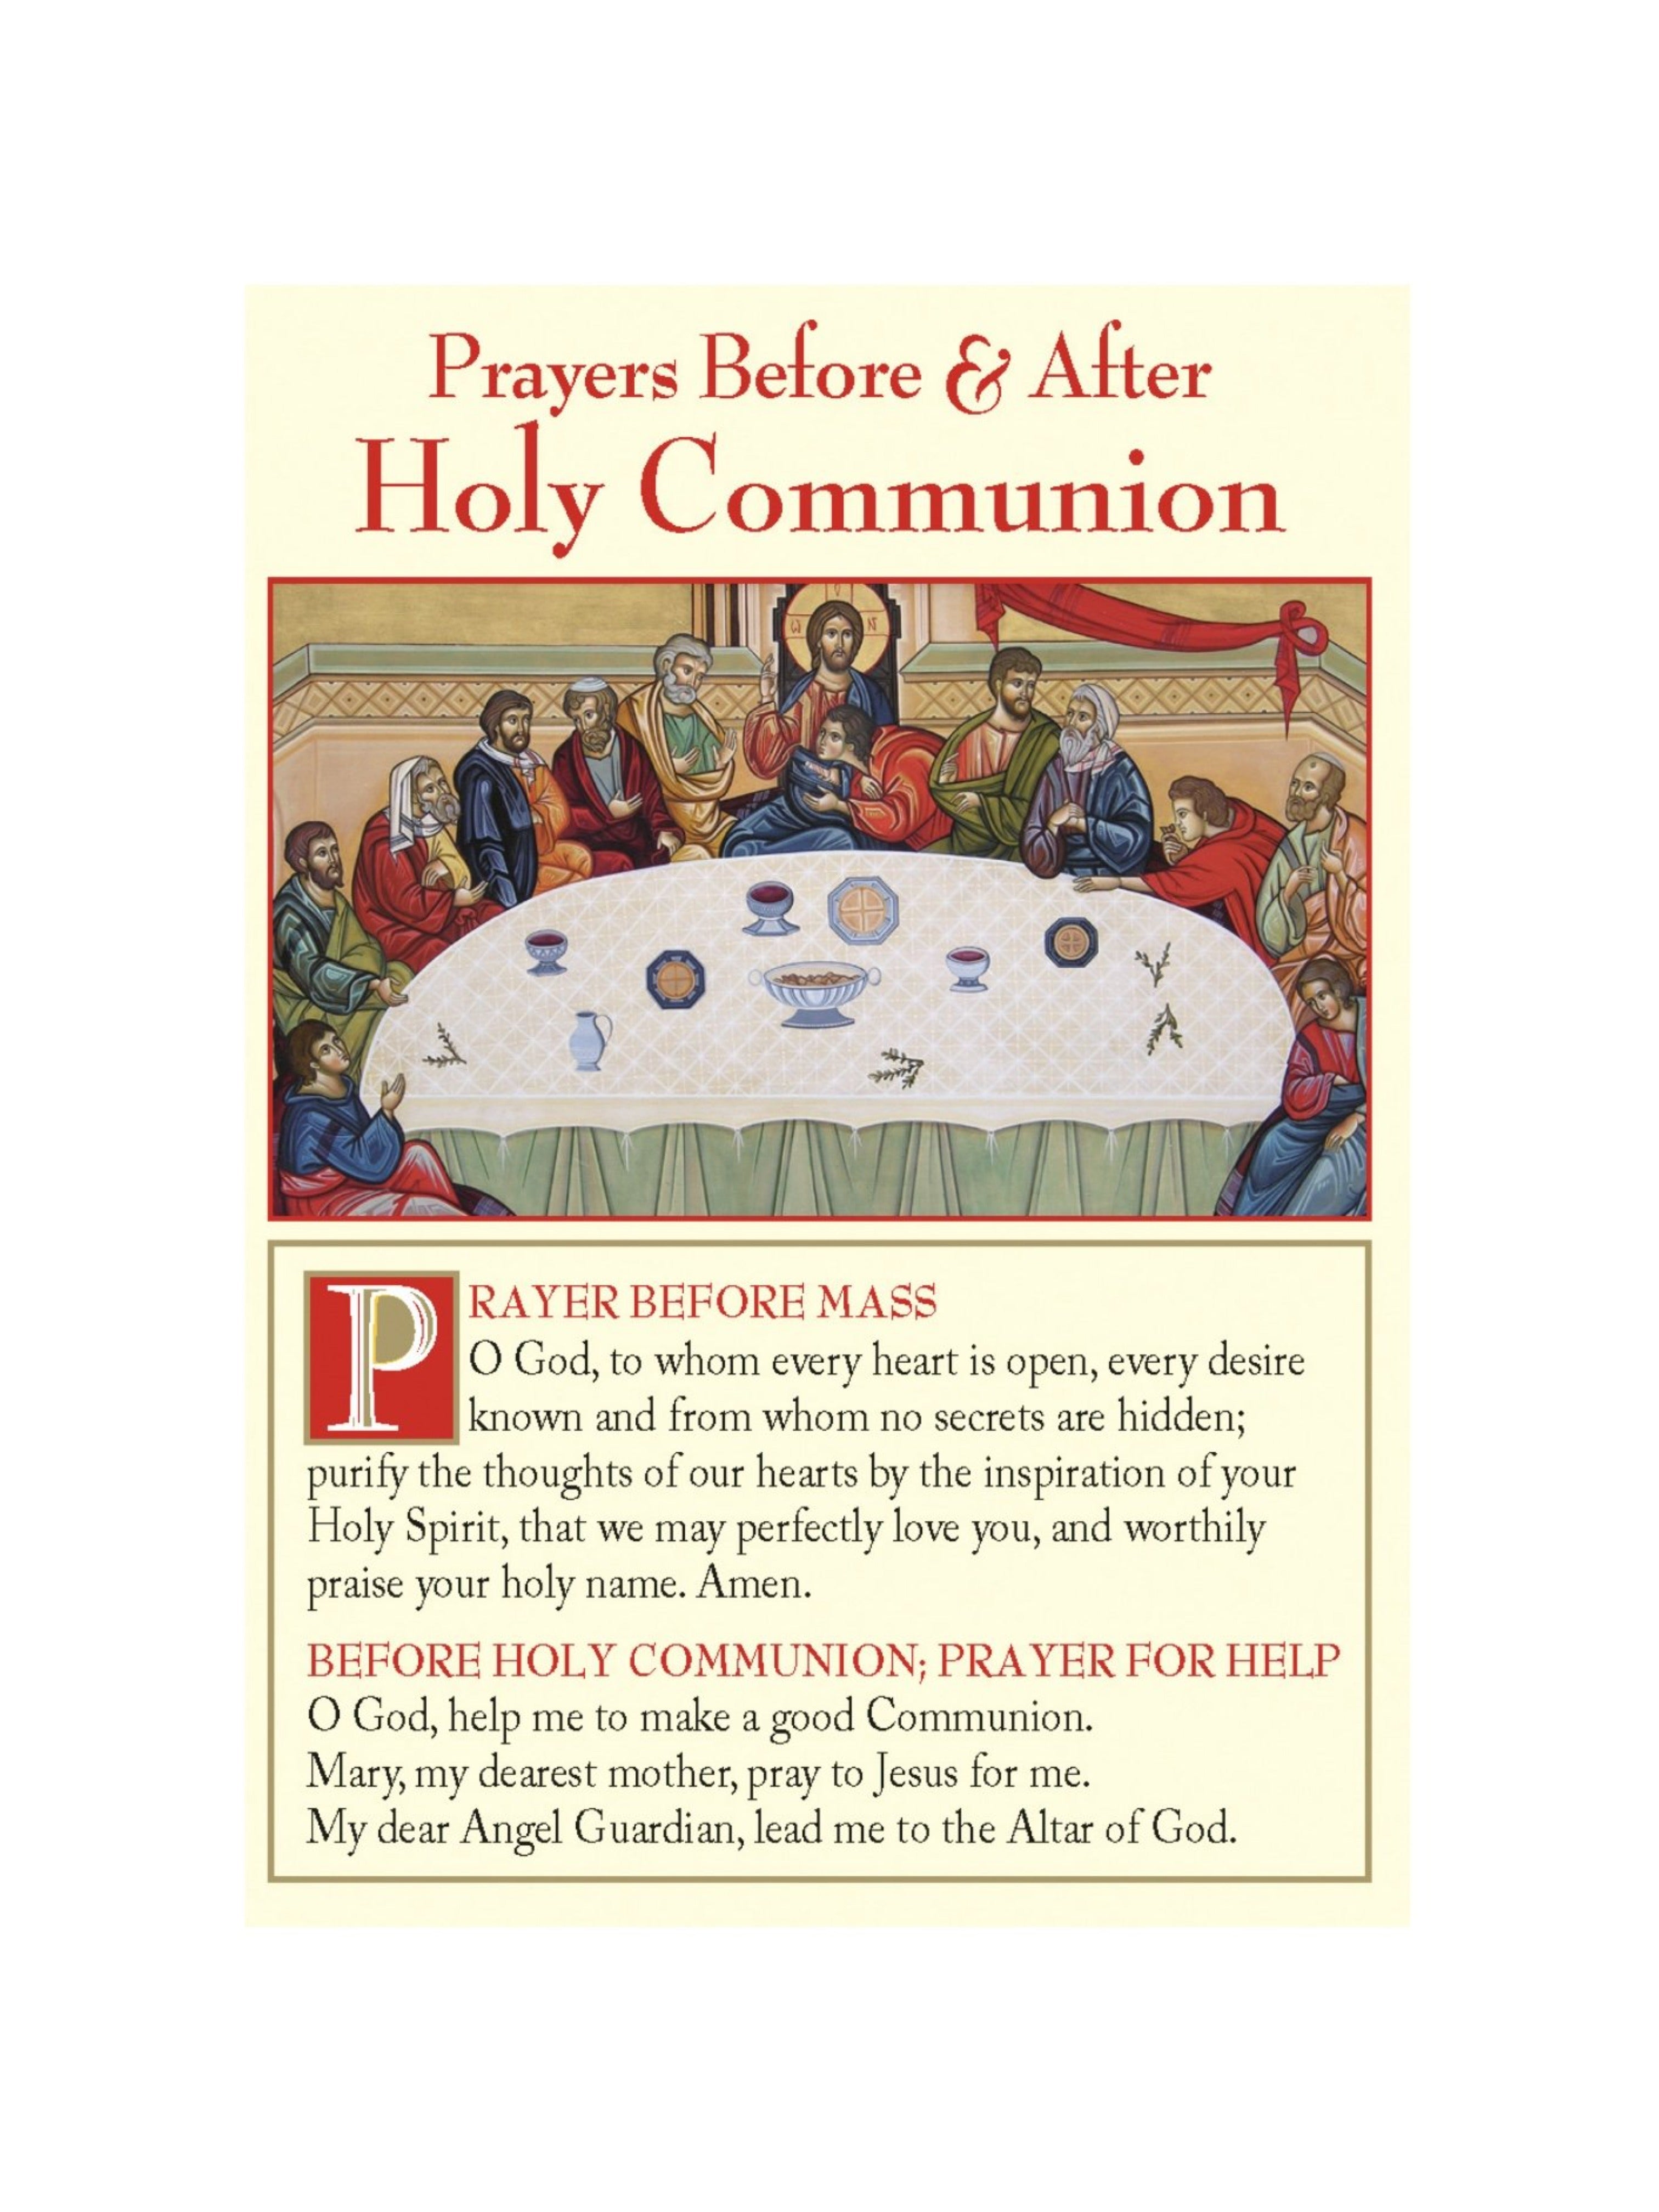 Prayers Before & After Holy Communion Leaflet